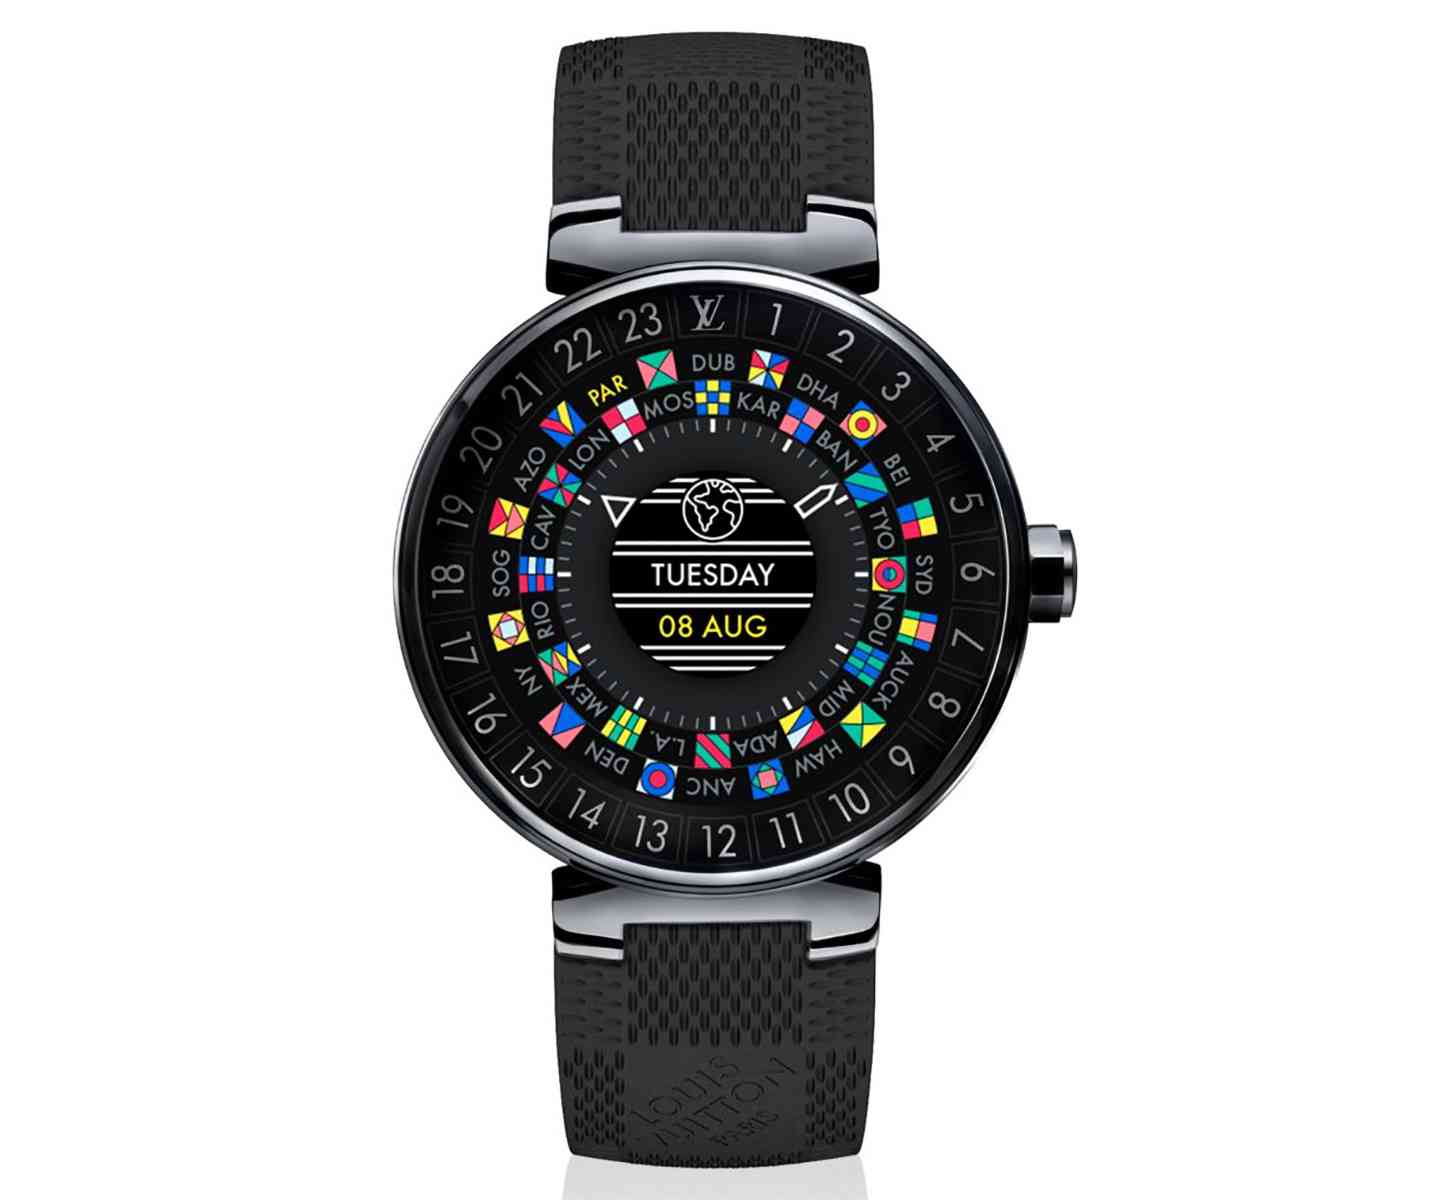 Louis Vuitton Tambour Horizon is a new Android Wear smartwatch that starts at $2,450 | PhoneDog